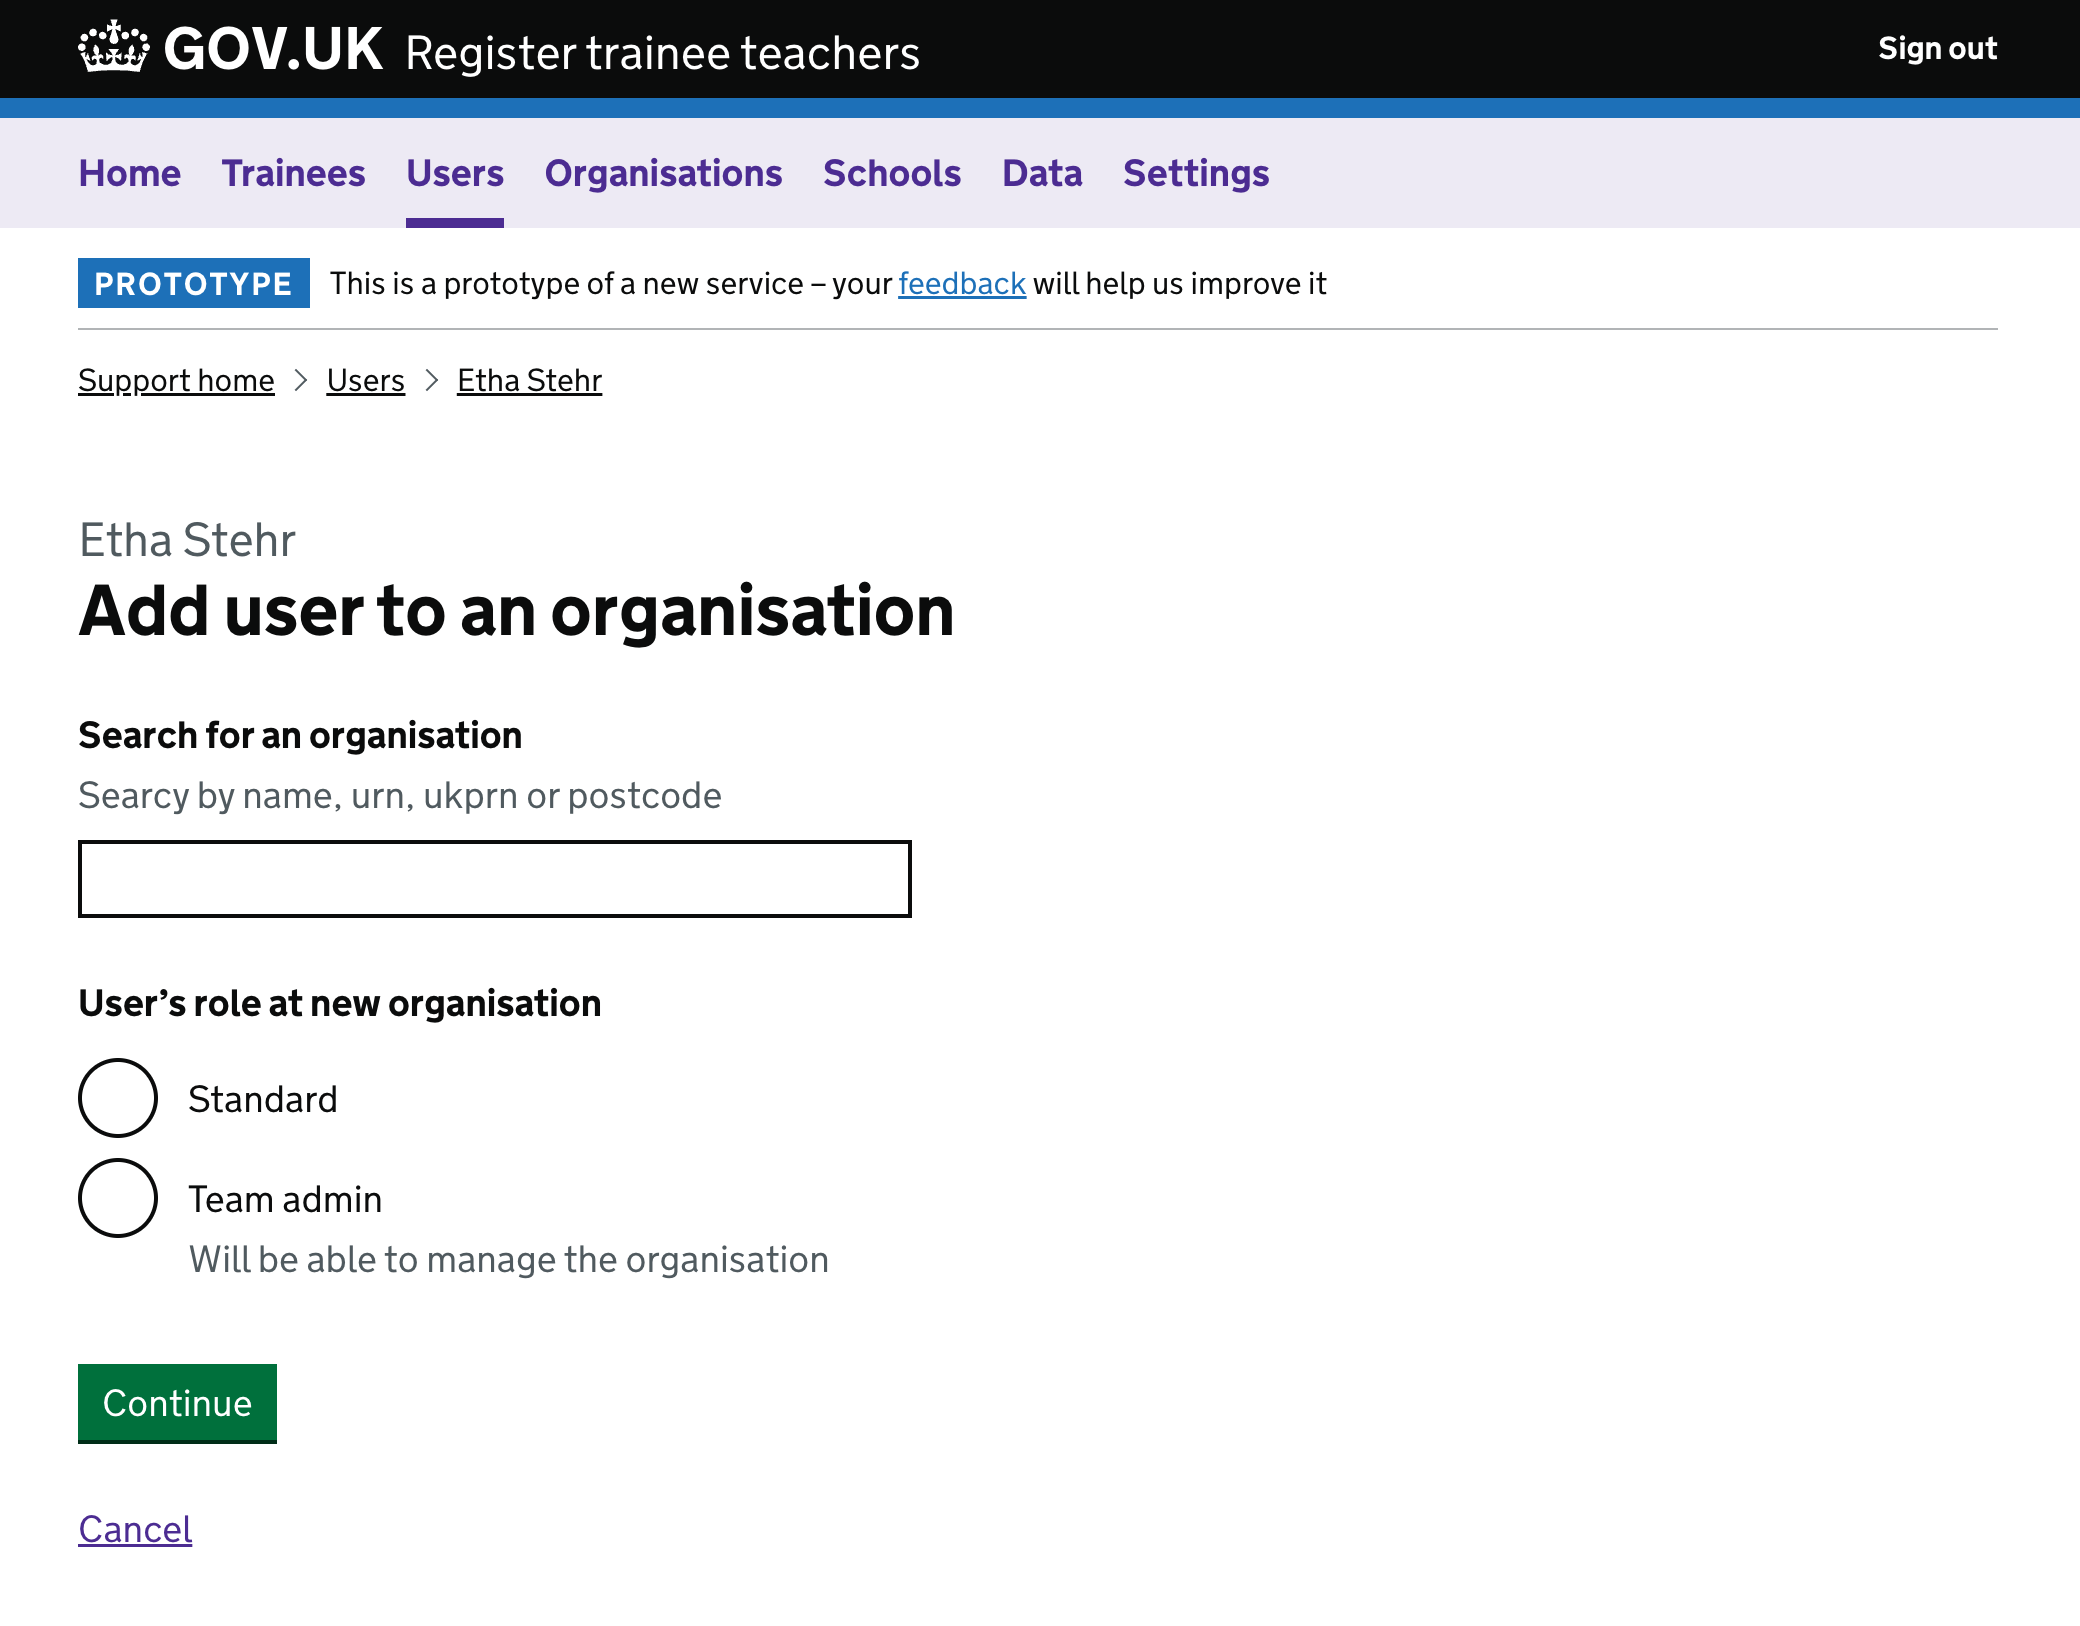 Screenshot of a page for adding a user to an organisation. The page asks the user for the organisation name and 